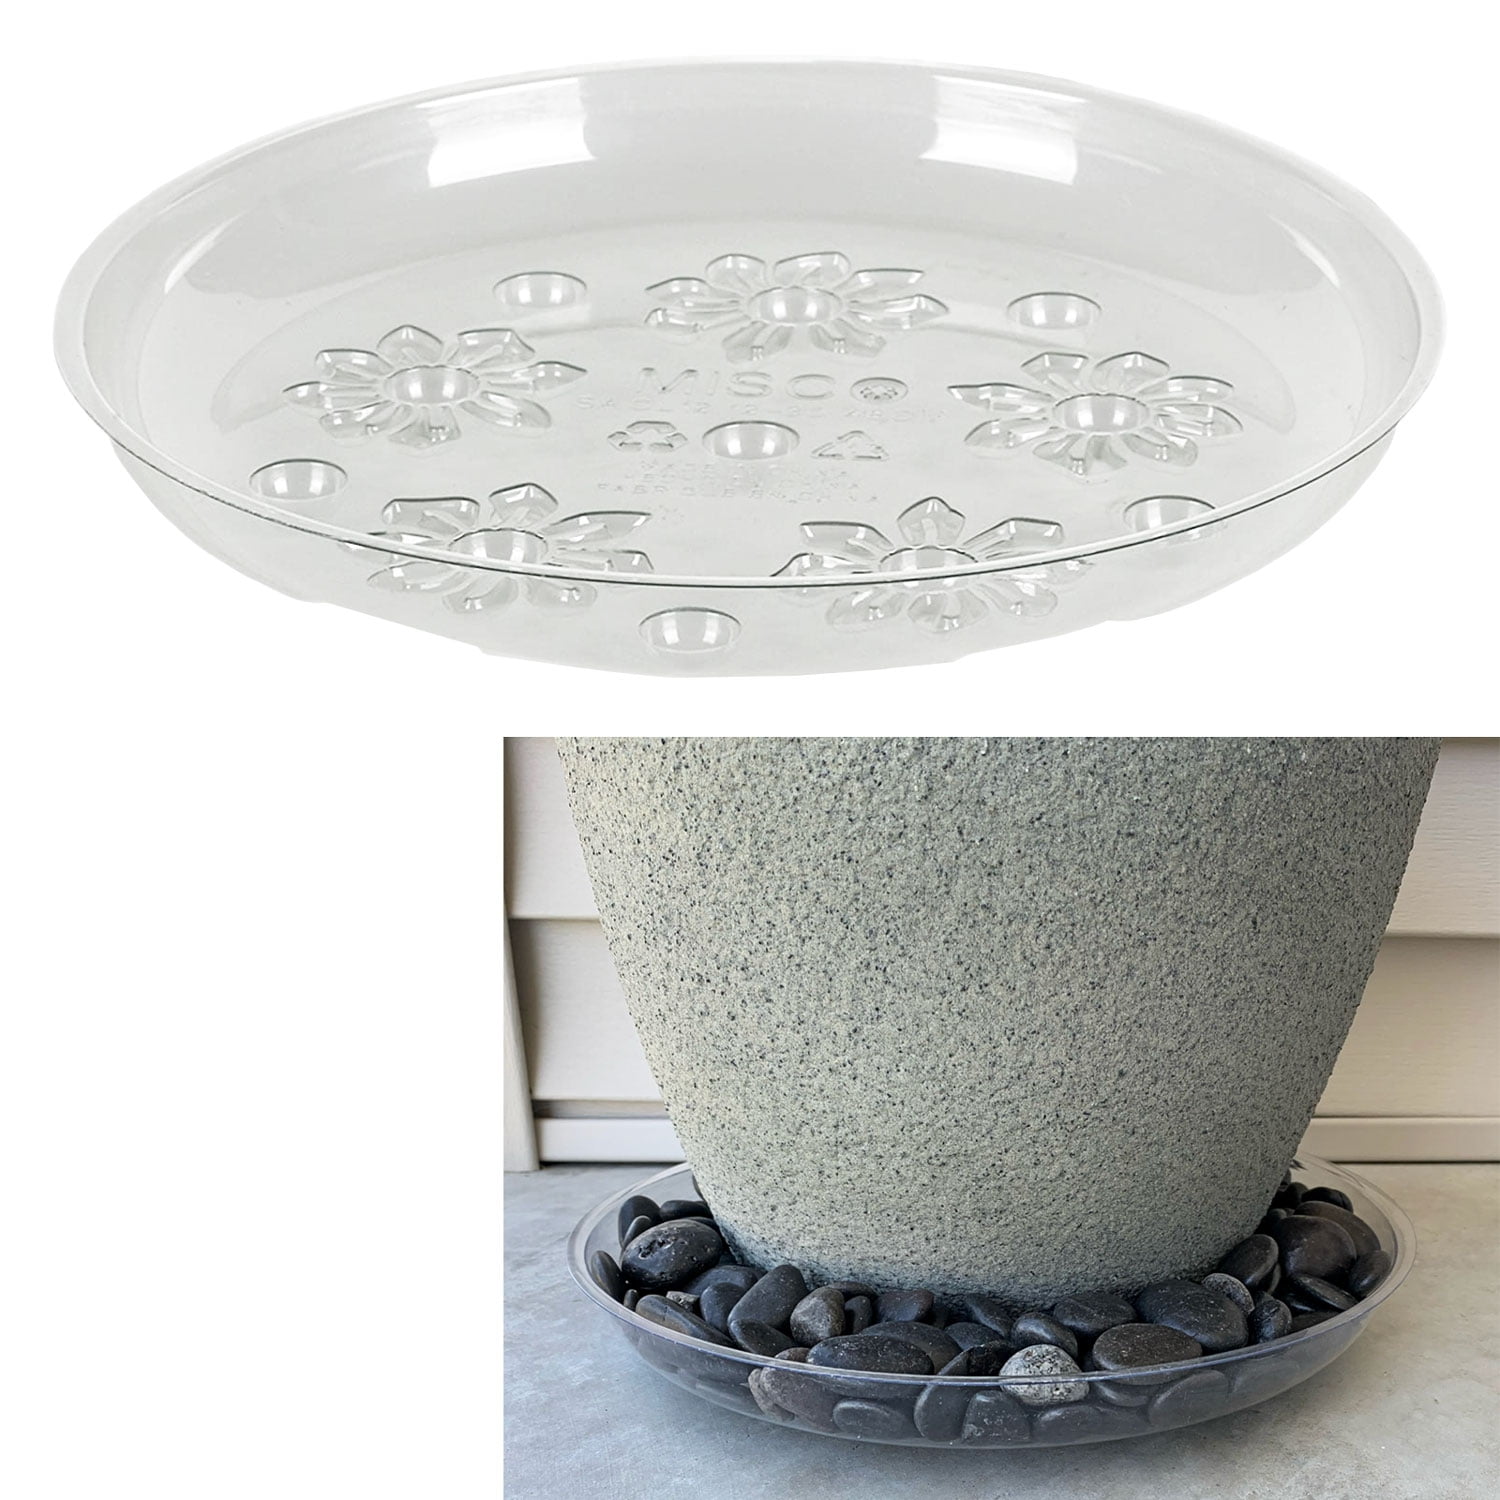 12*PLASTIC ROUND PLANT FLOWER POT BASE SAUCER PLATE WATER DRIP TRAY PLANTER TRAY 